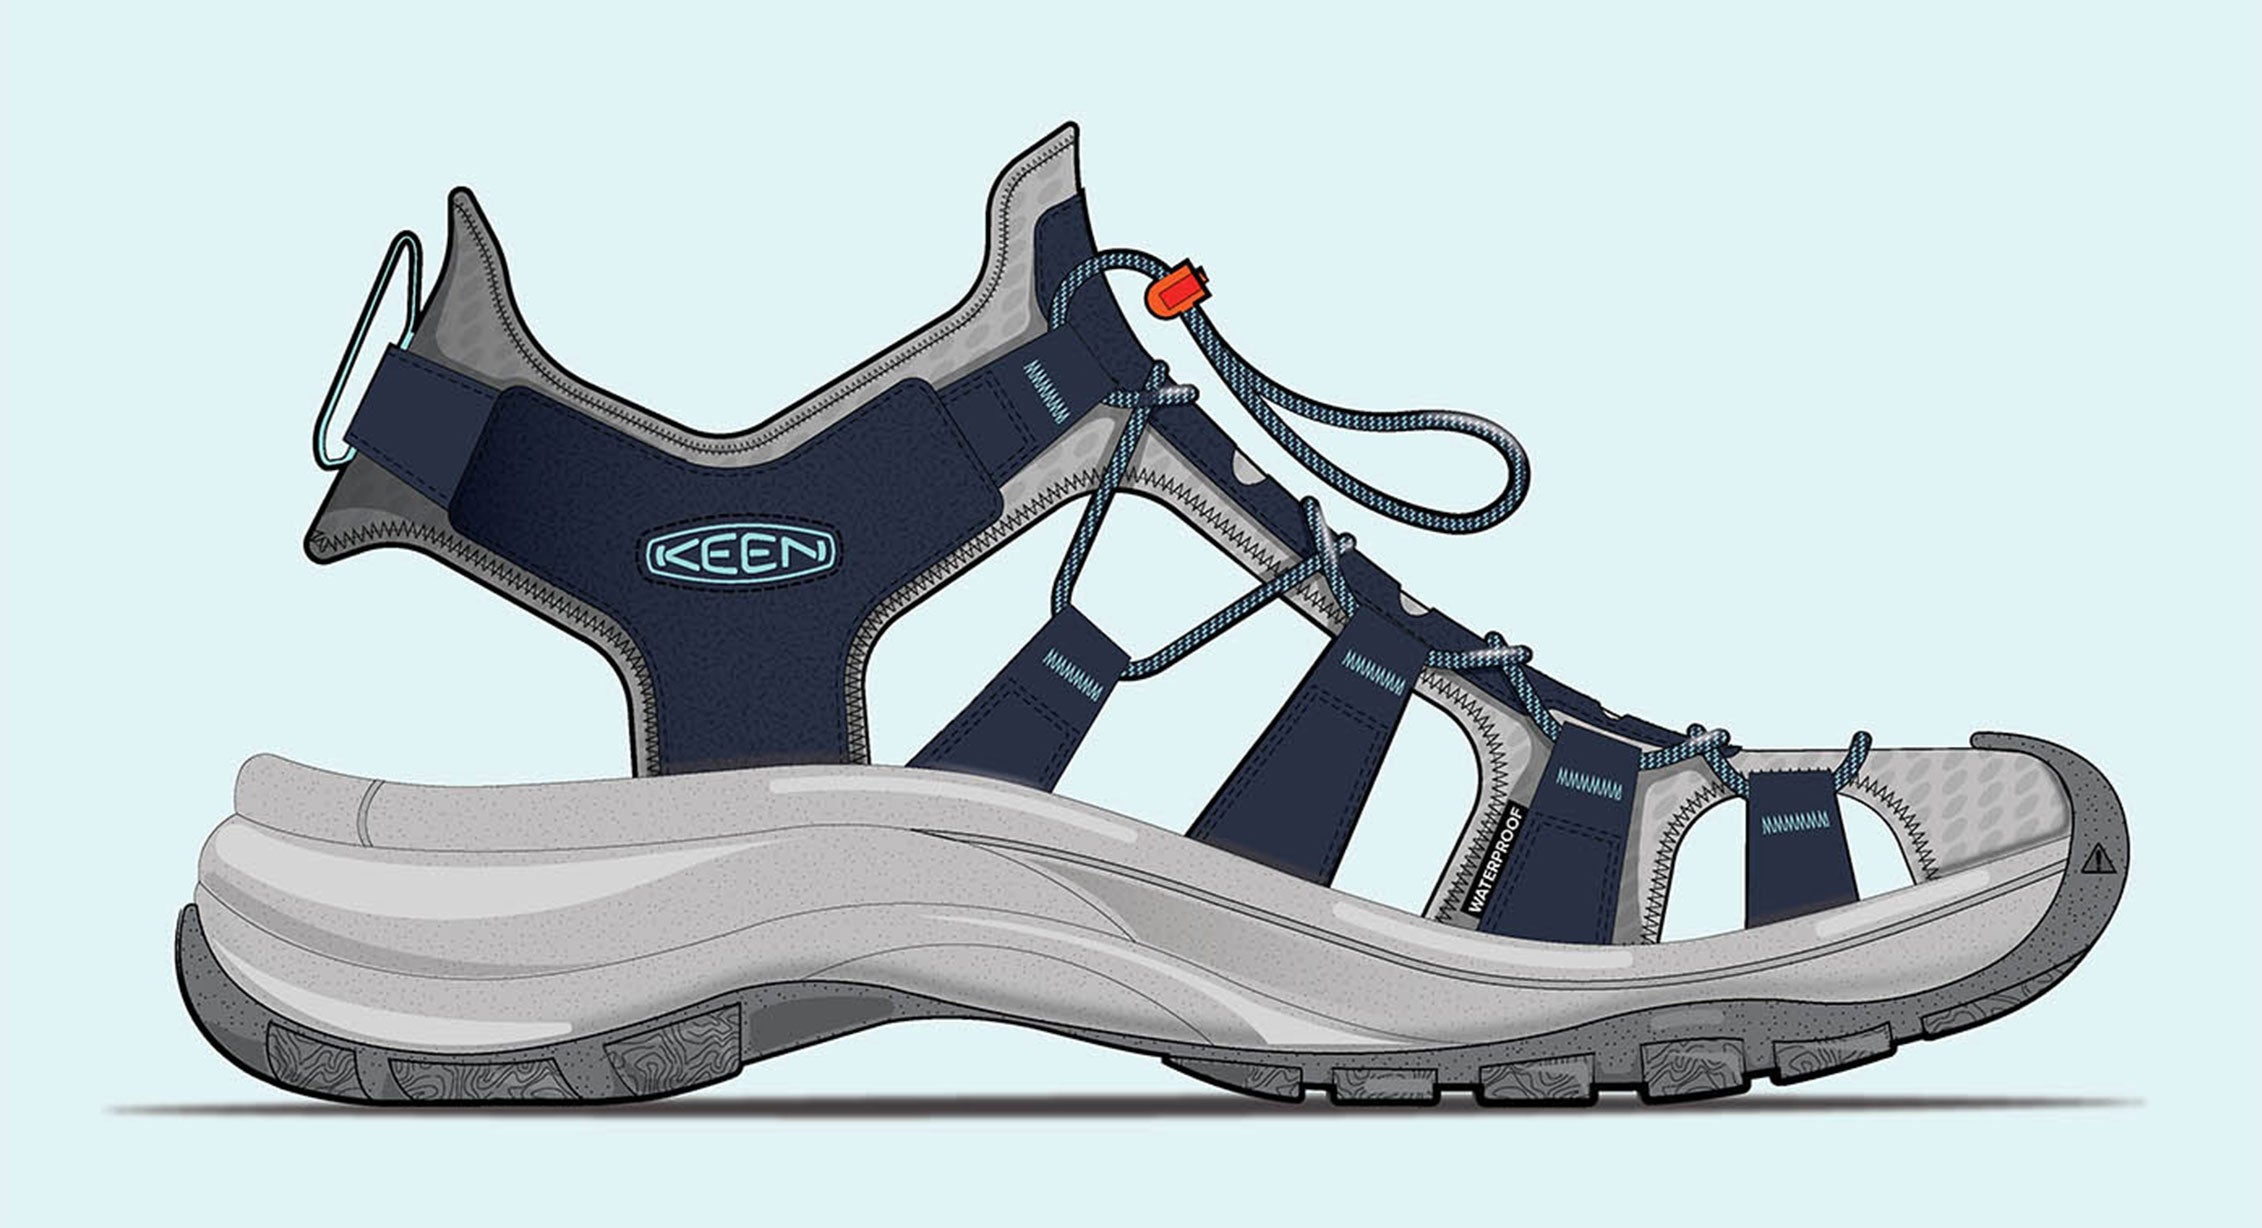 A render of the new KEEN Astoria West wedge sandal